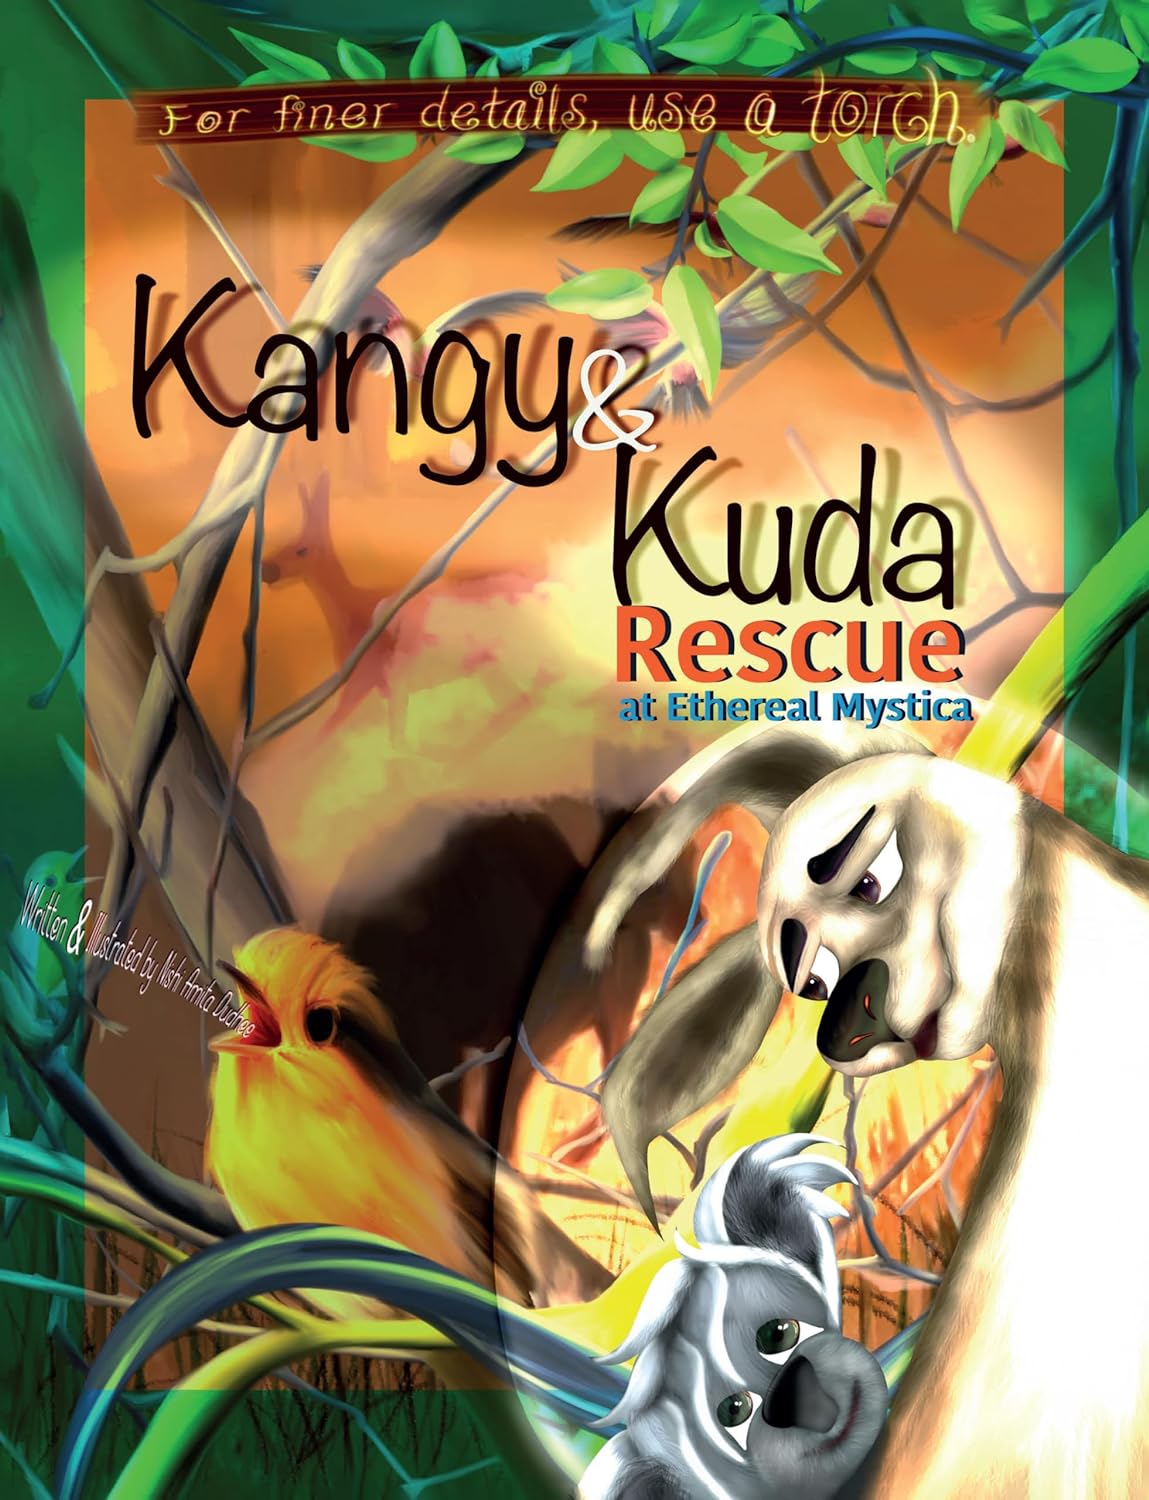 "Kangy and Kuda: Rescue at Ethereal Mystica" - A New Illustrated Children’s Book by Nishi Amita Dudhee Promotes Environmental Awareness